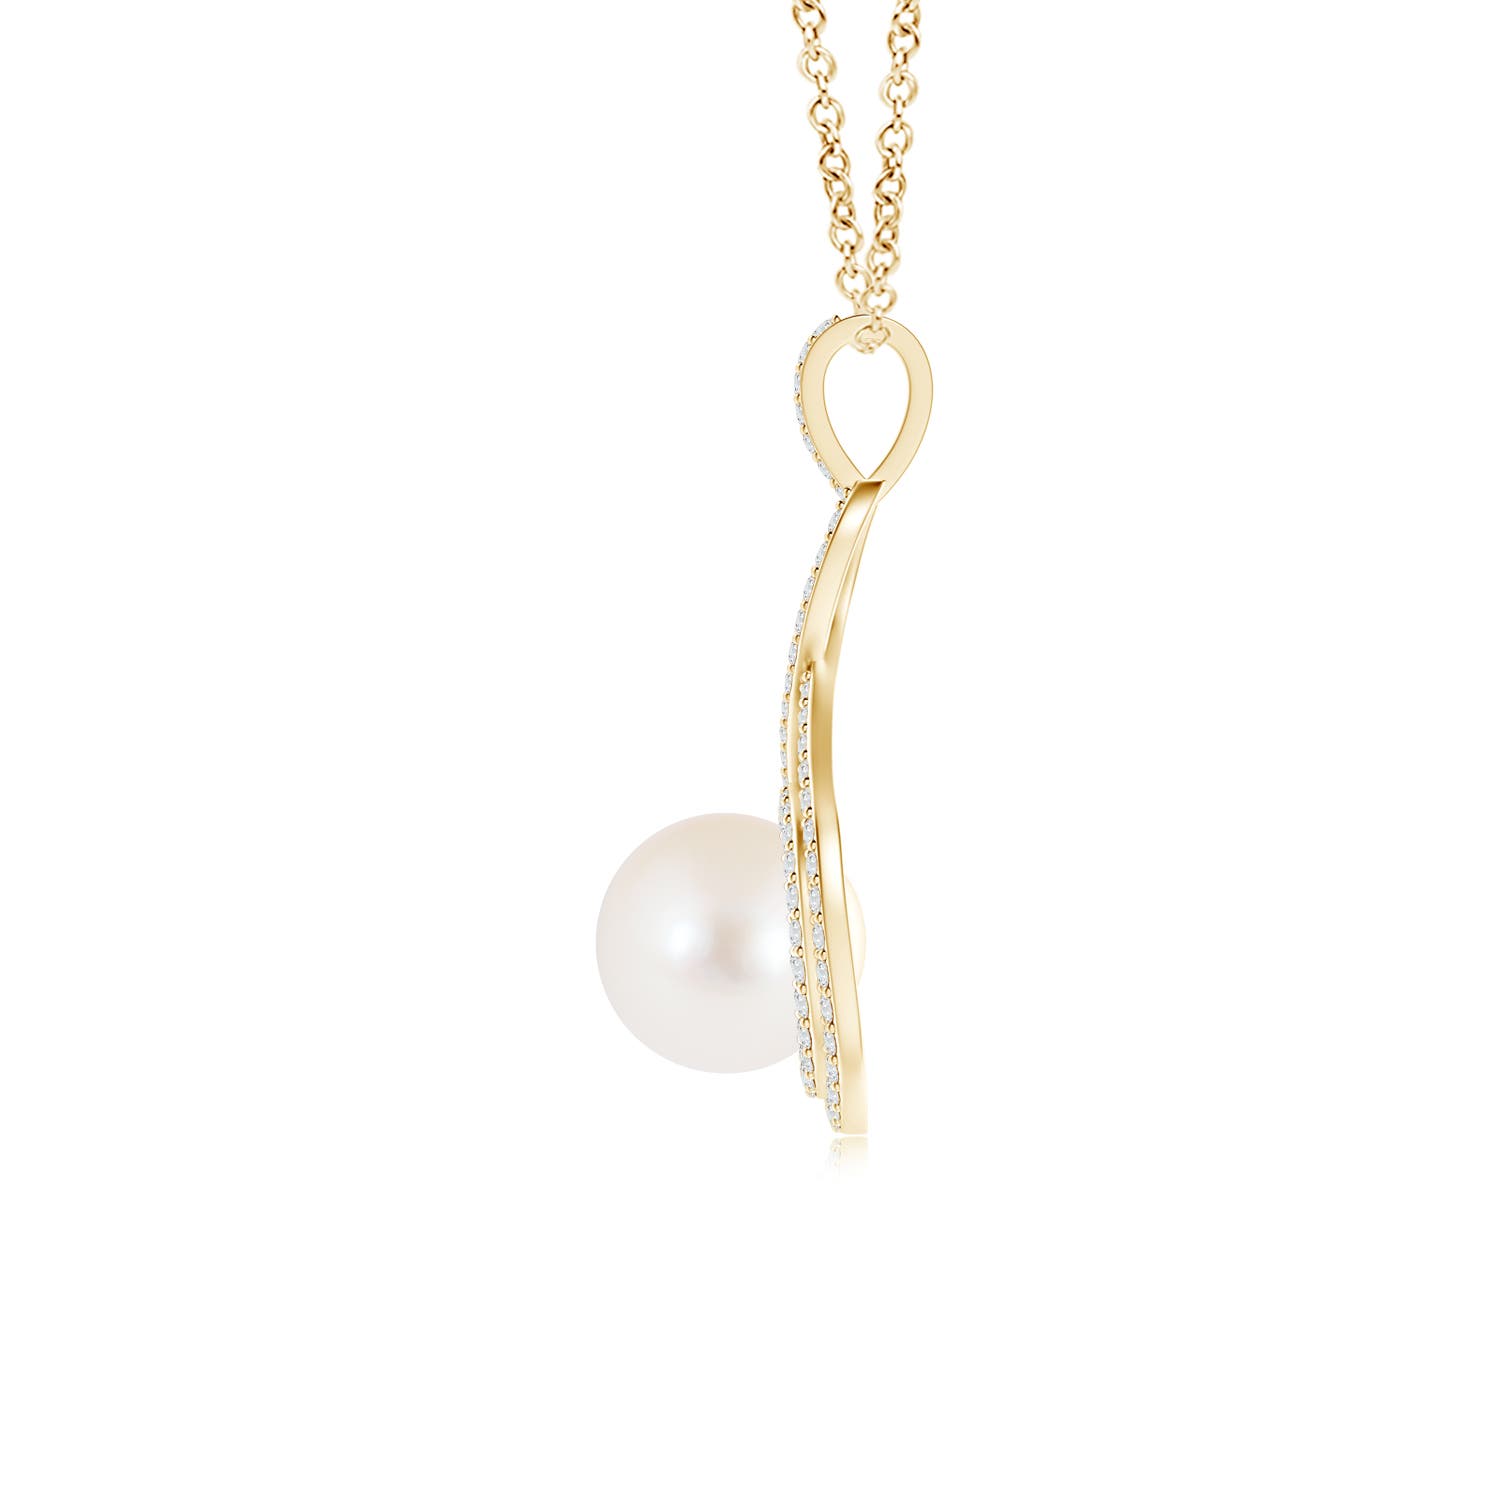 AAA - Freshwater Cultured Pearl / 4.08 CT / 14 KT Yellow Gold